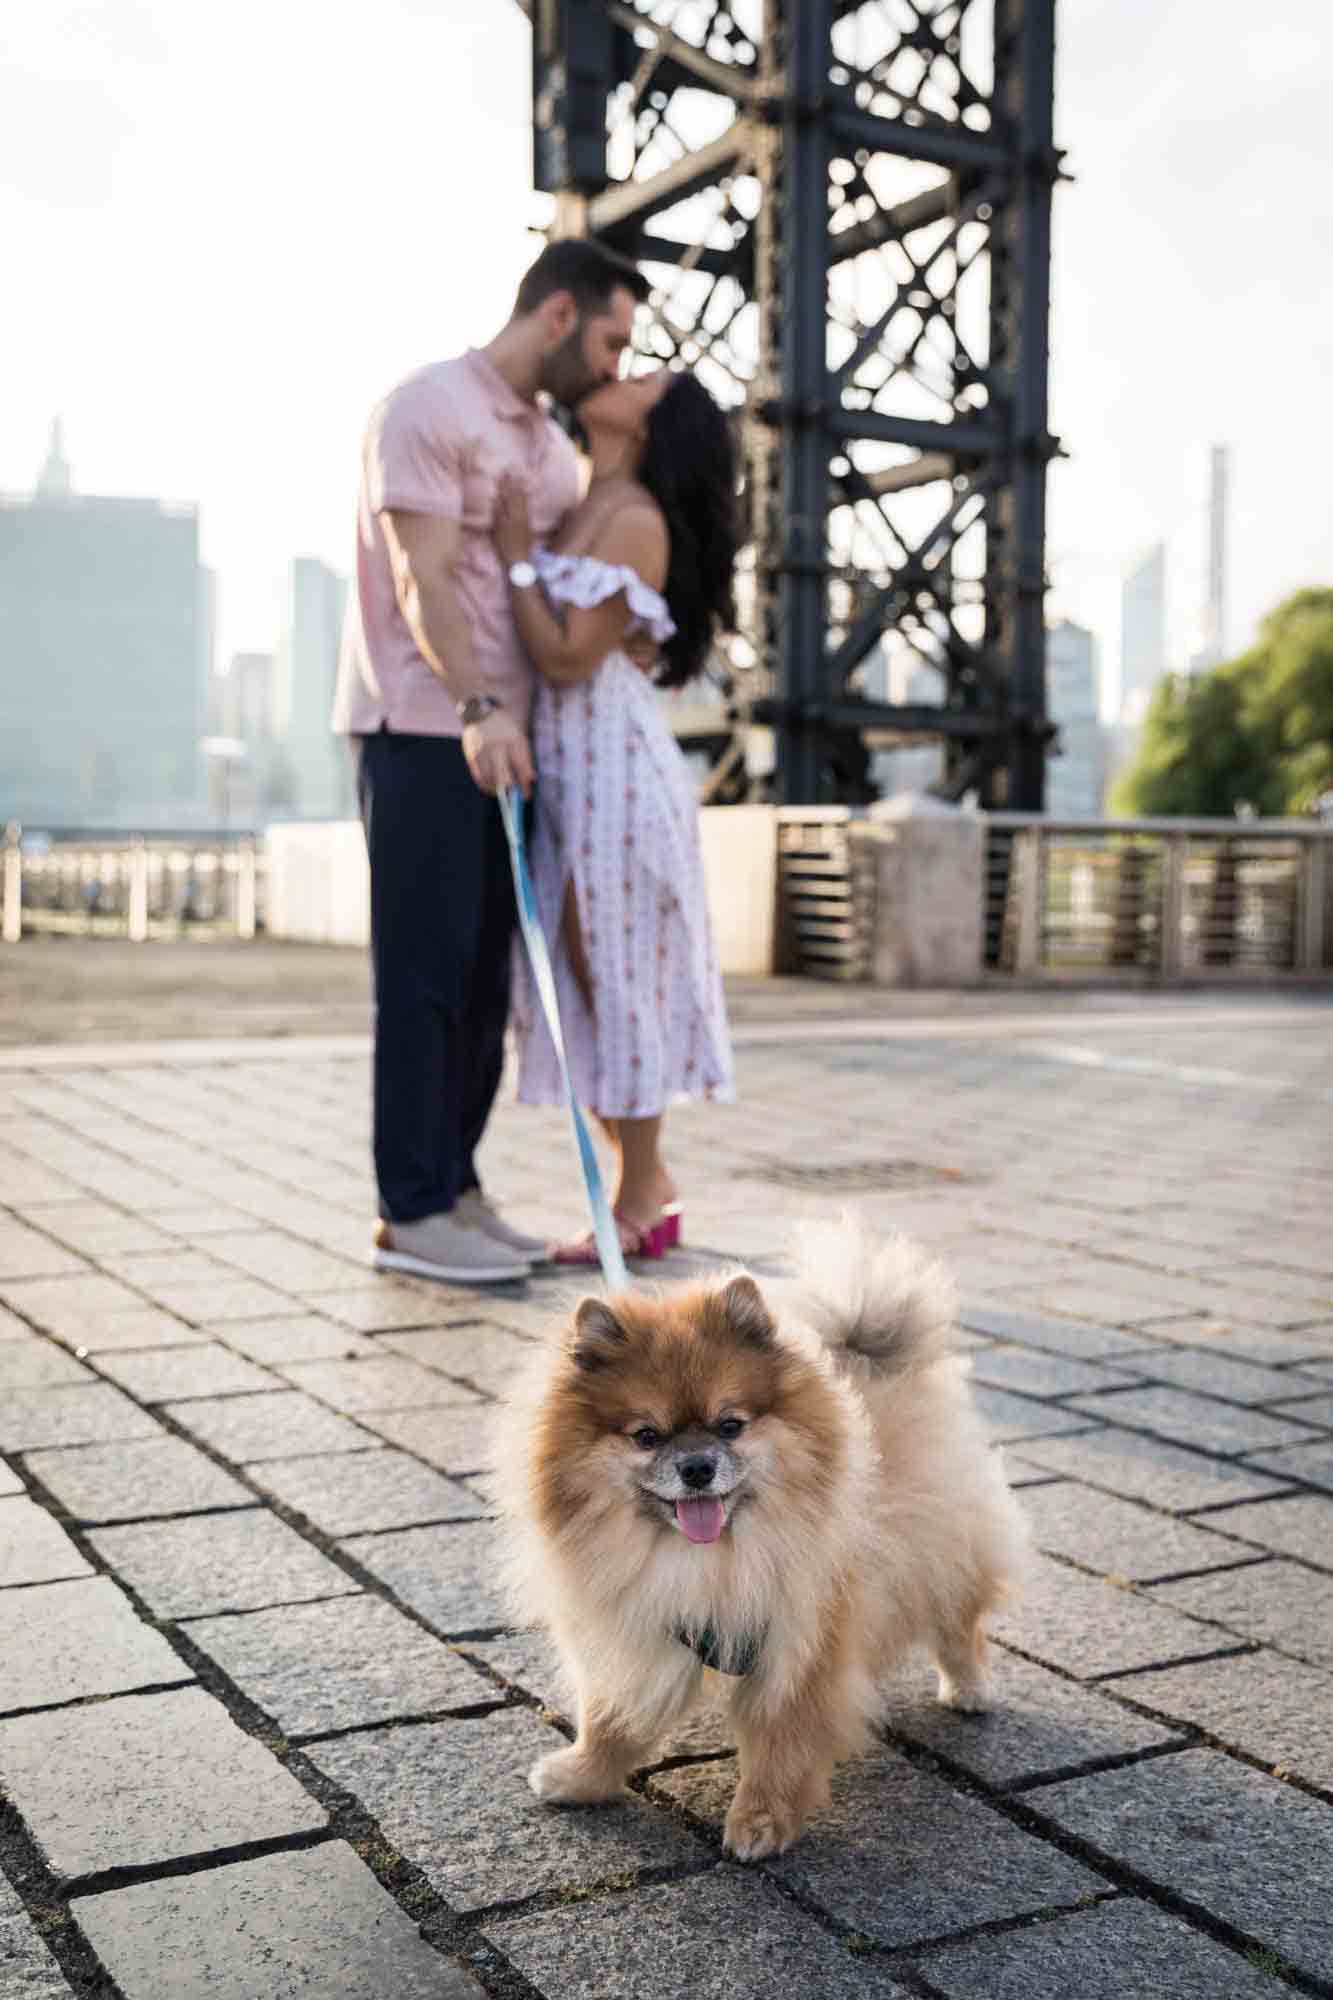 Pomeranian on leash with couple kissing in background during a Gantry Plaza State Park engagement photo shoot